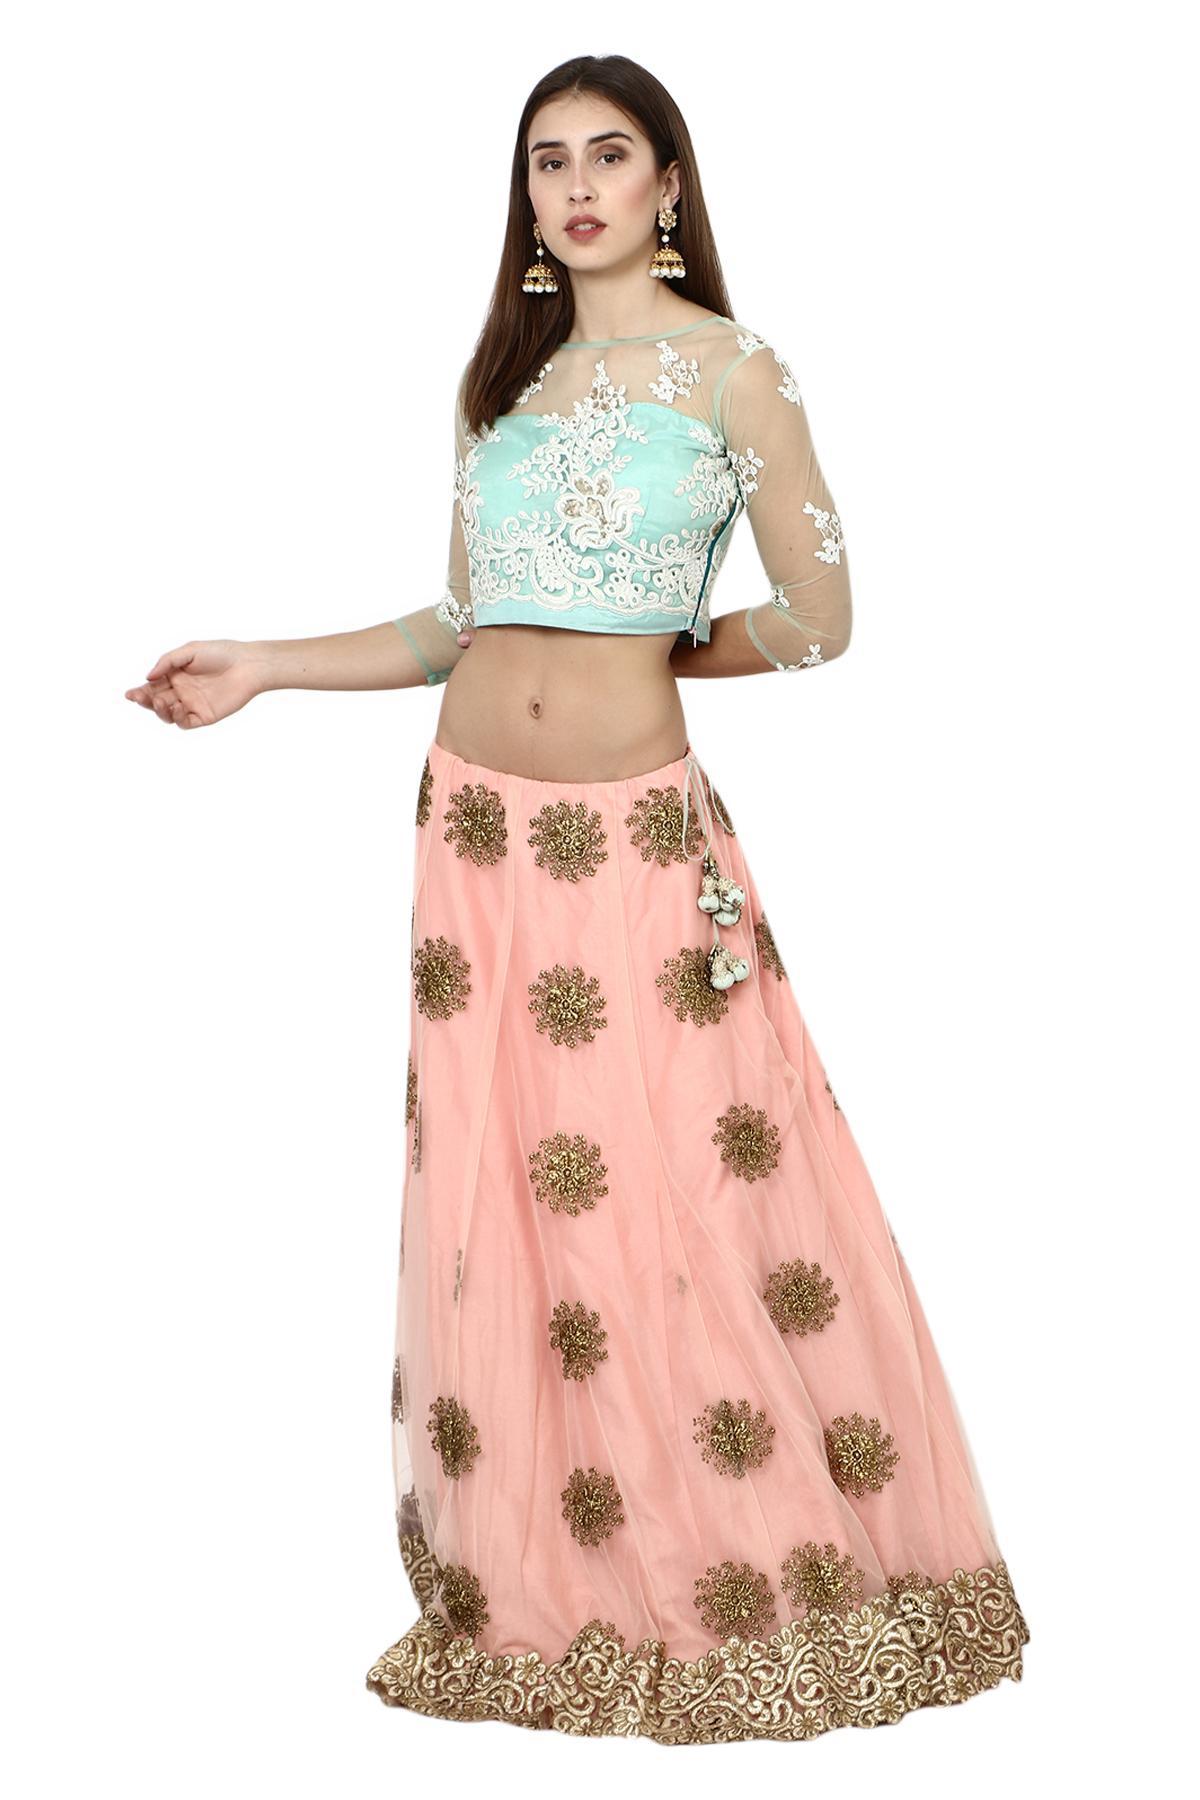 Style Tips On How To Wear Crop Tops – South India Fashion | Wear crop top,  Long skirt, Crop top skirt